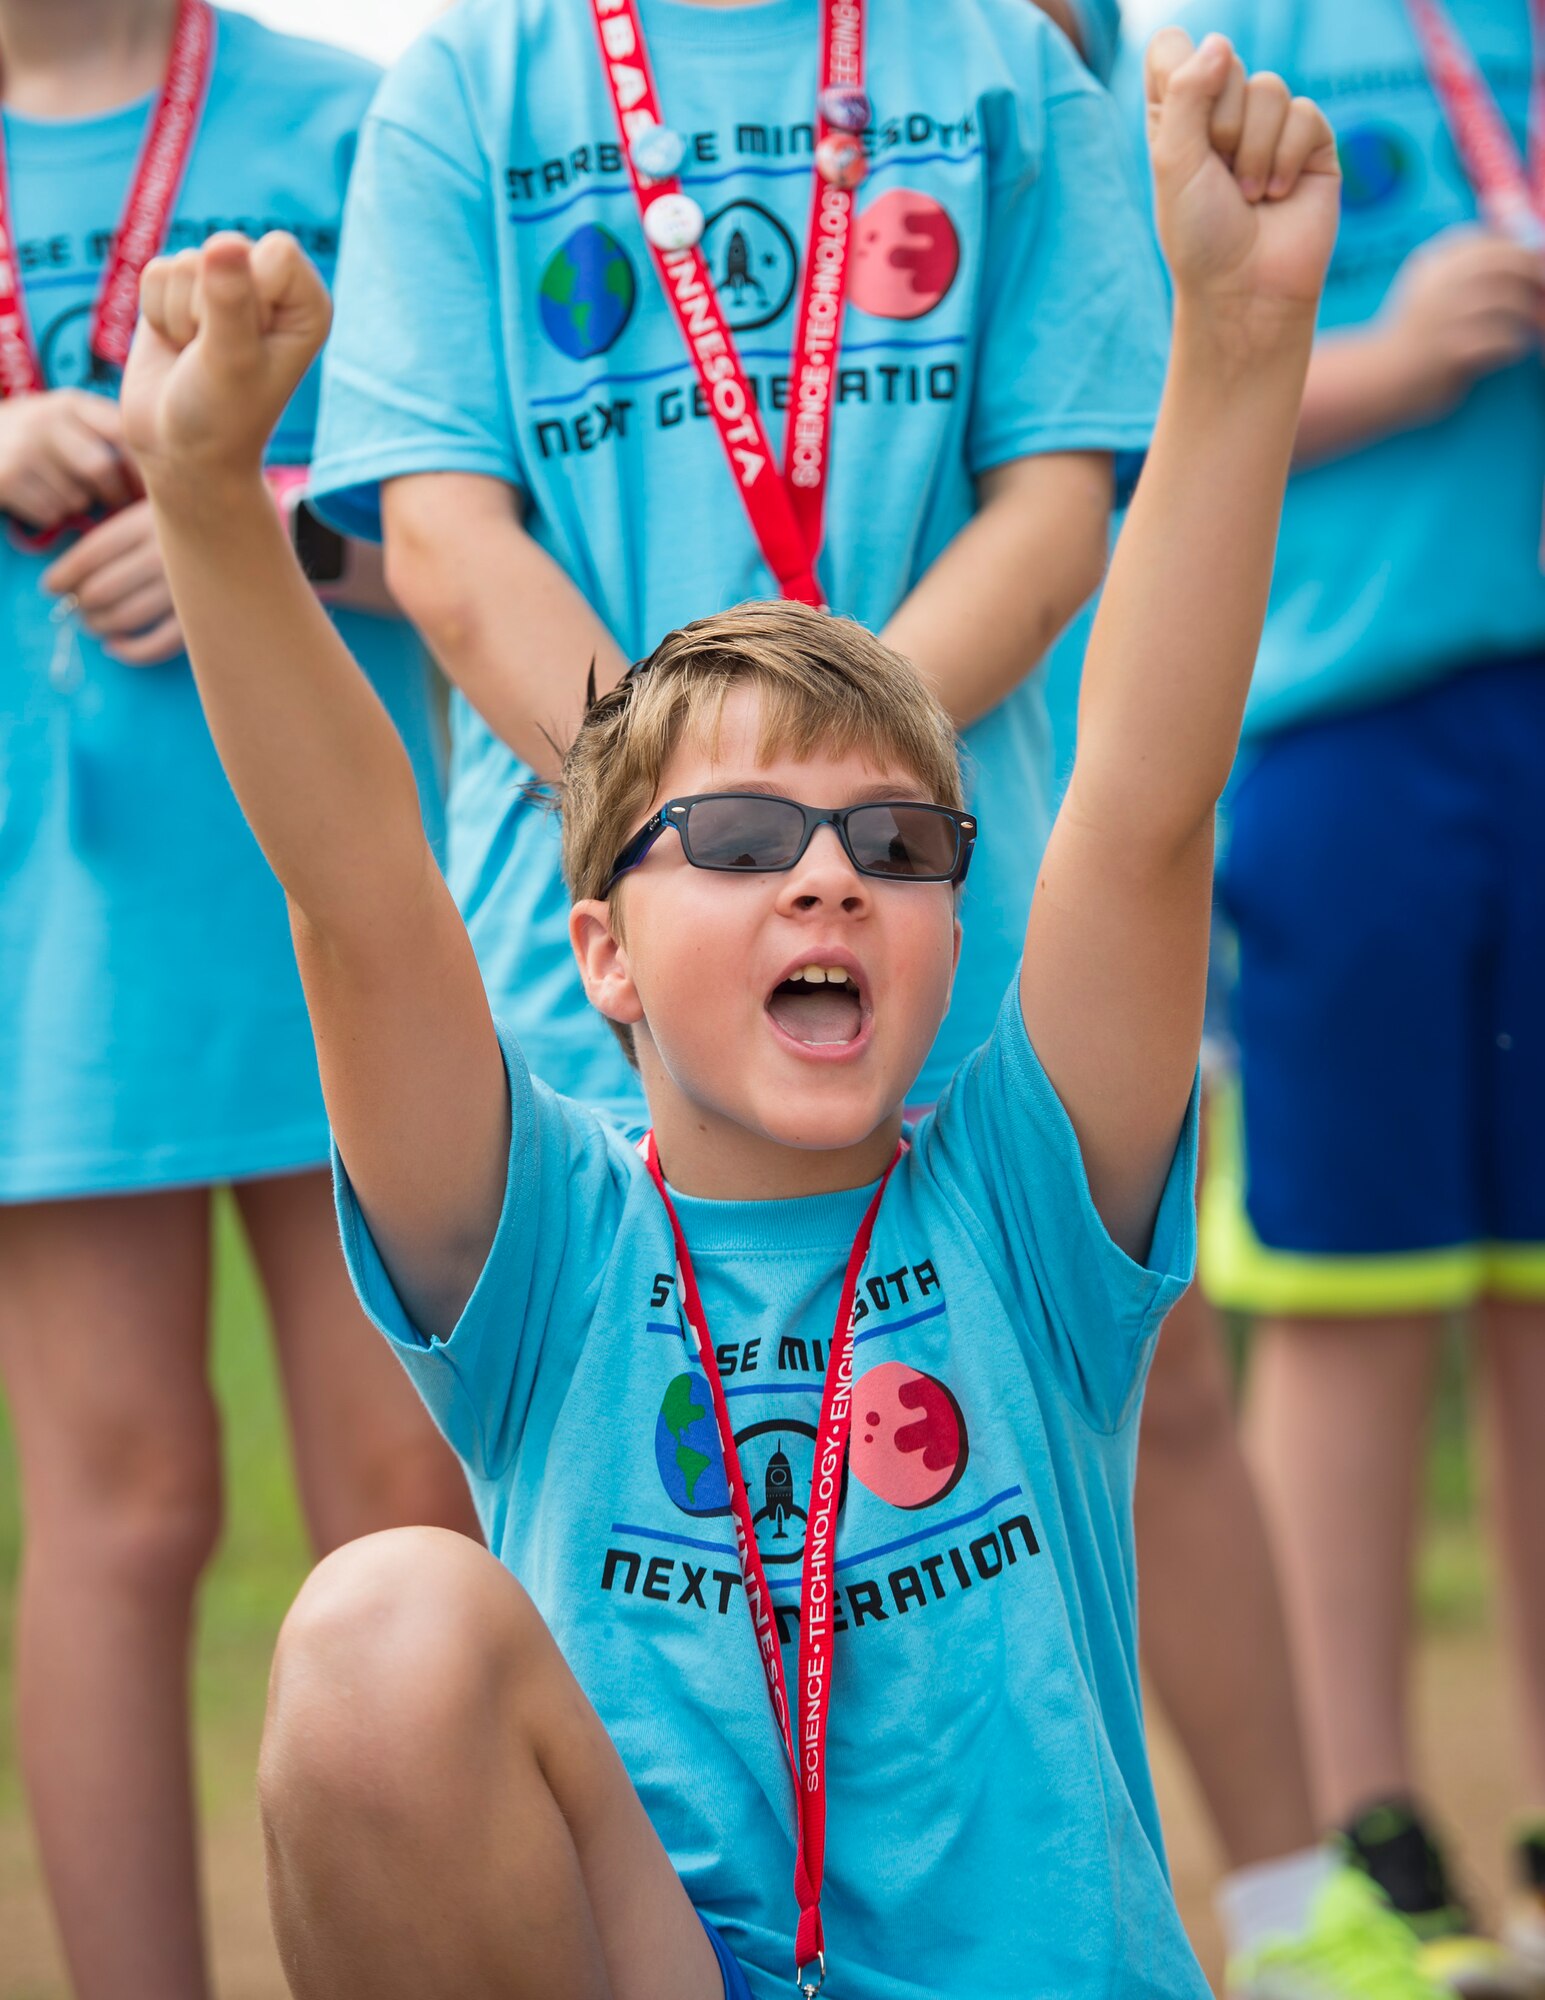 A student from STARBASE Minnesota celebrates after his rocket’s parachute opens in St. Paul, Minn., July 18, 2019.